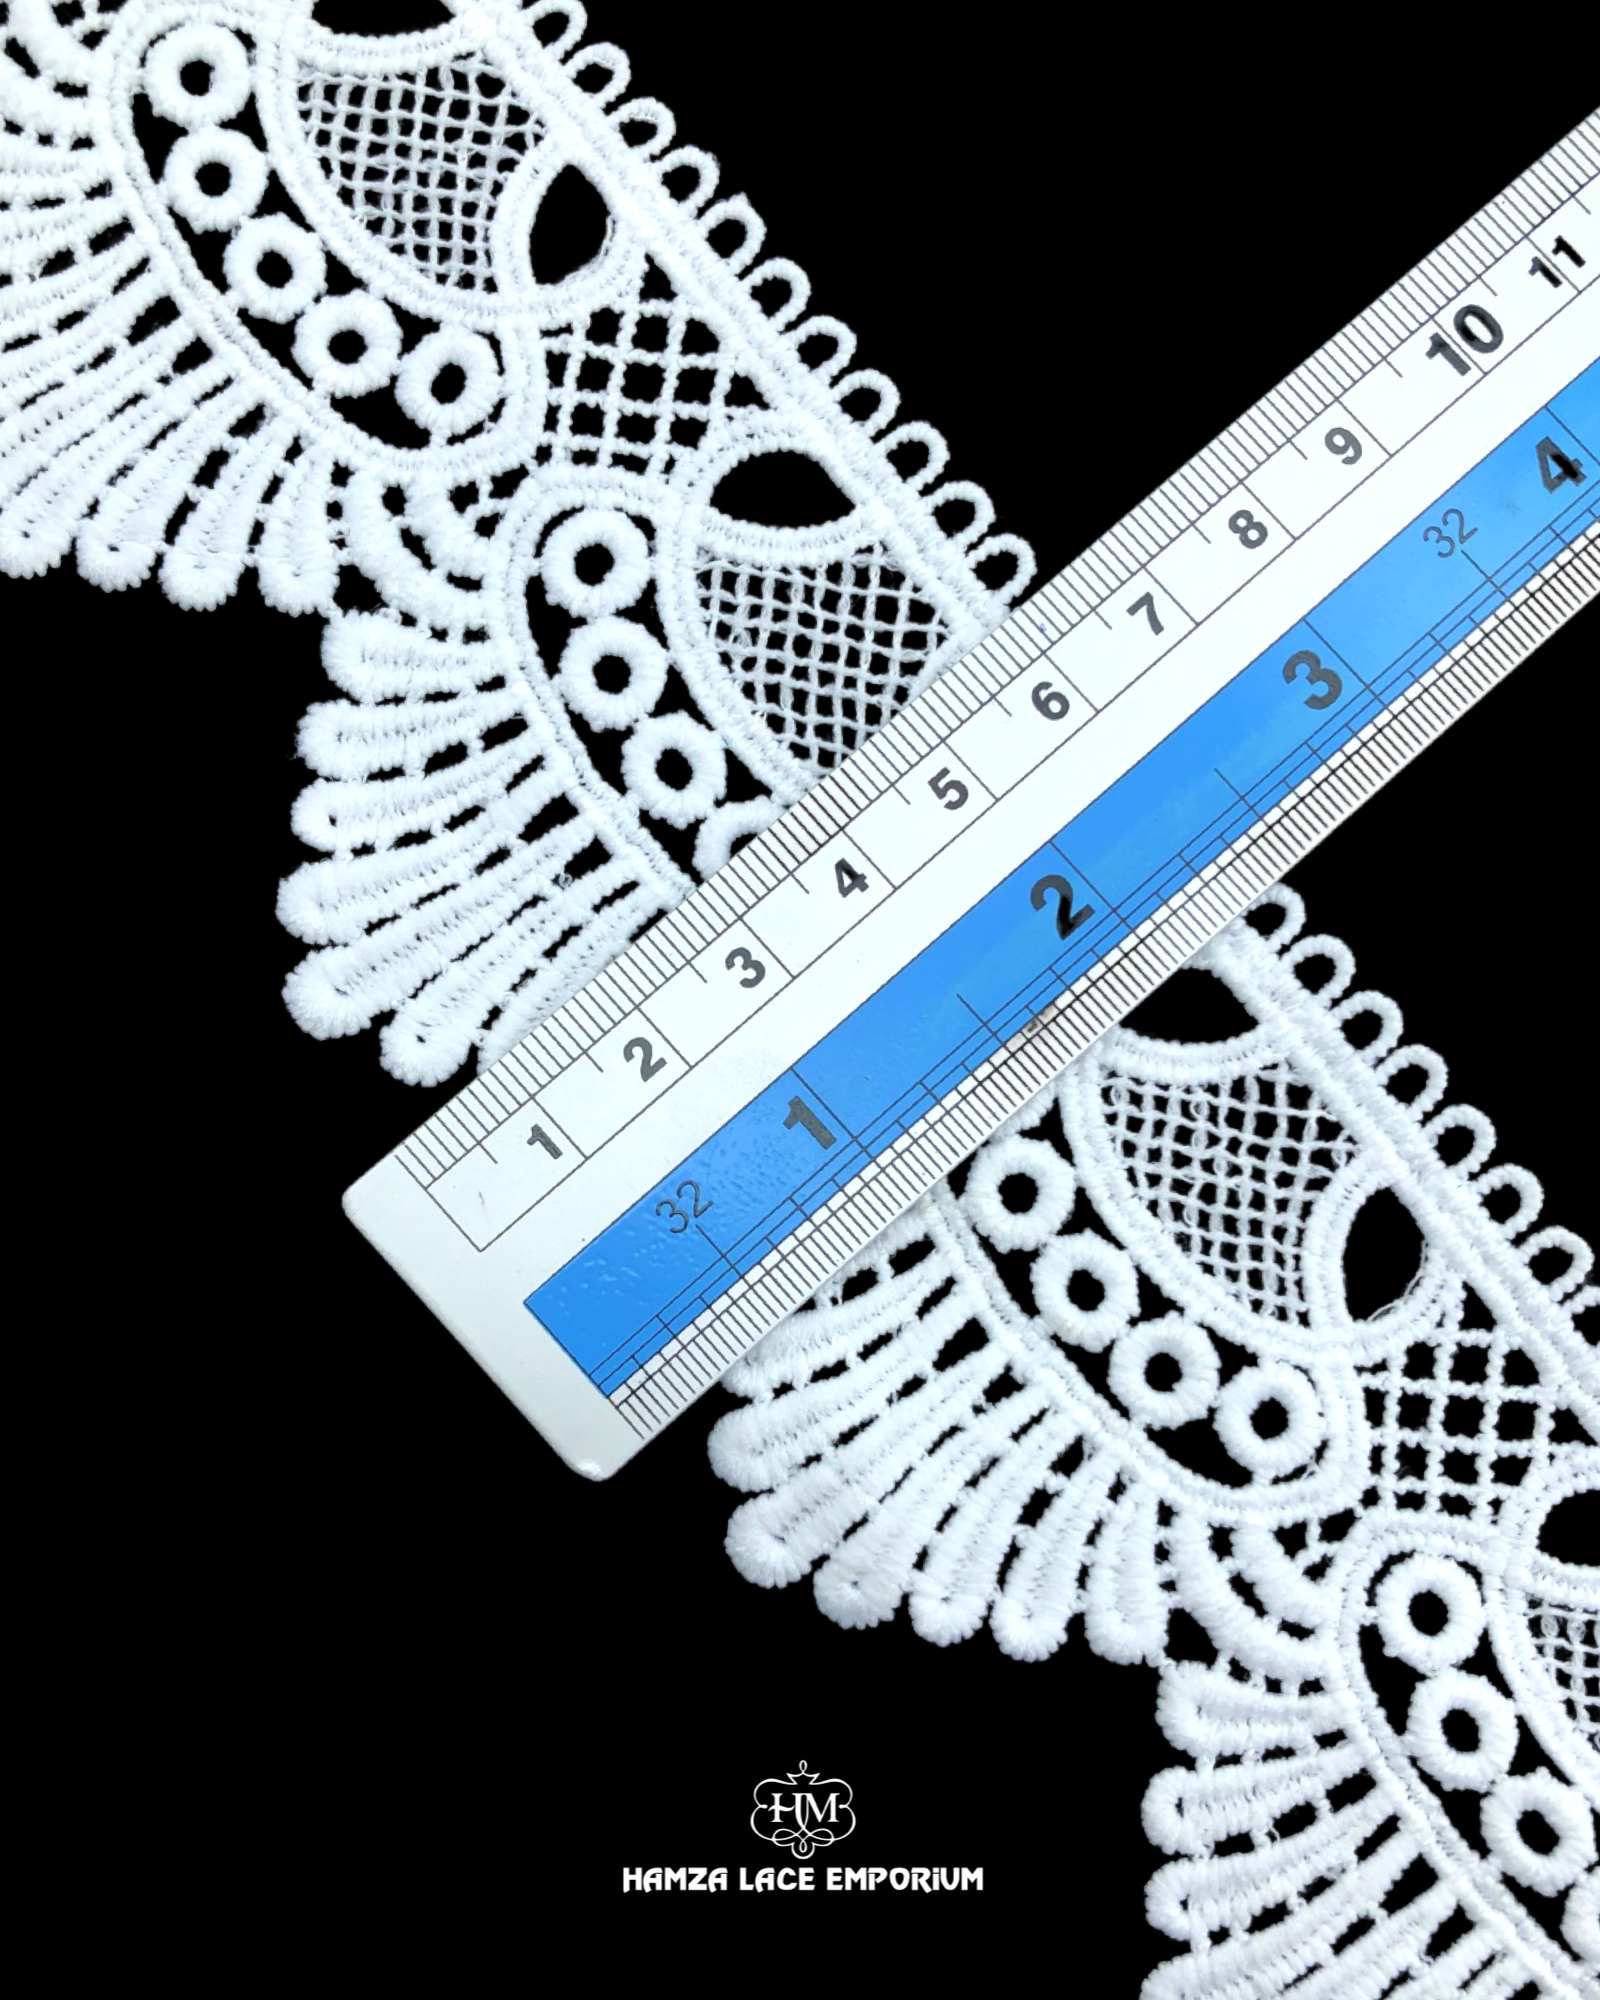 The size of the 'Edging Lace 23302' is given as '2.5' inches by placing a ruler on it